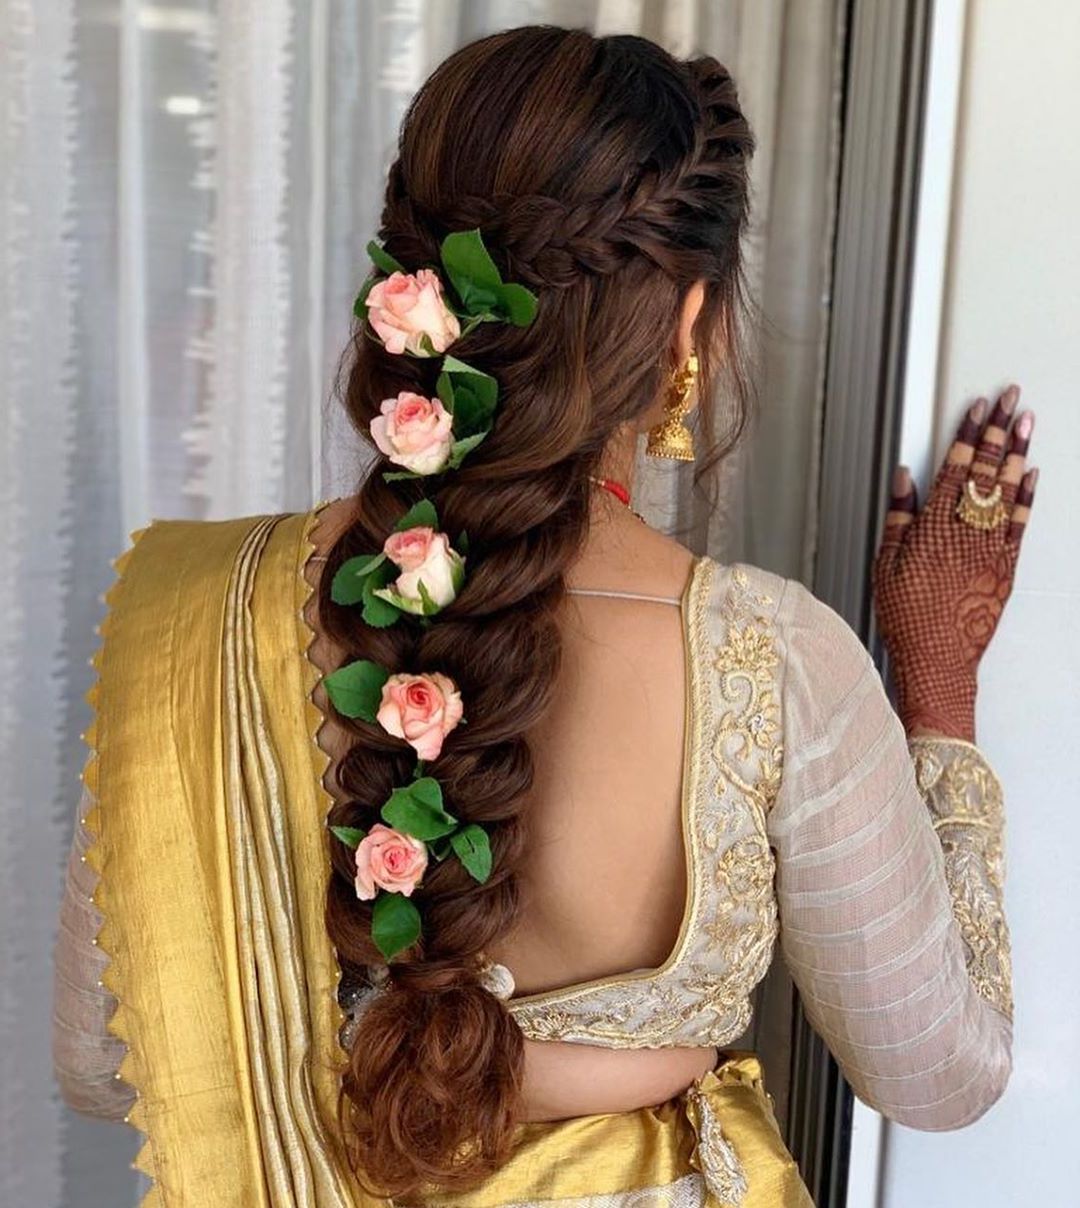 Bridal Hairstyles With Flowers: All The Bollywood Celebrity Inspiration You  Need | Vogue India Intended For Bridal Flower Hairstyle (View 9 of 25)